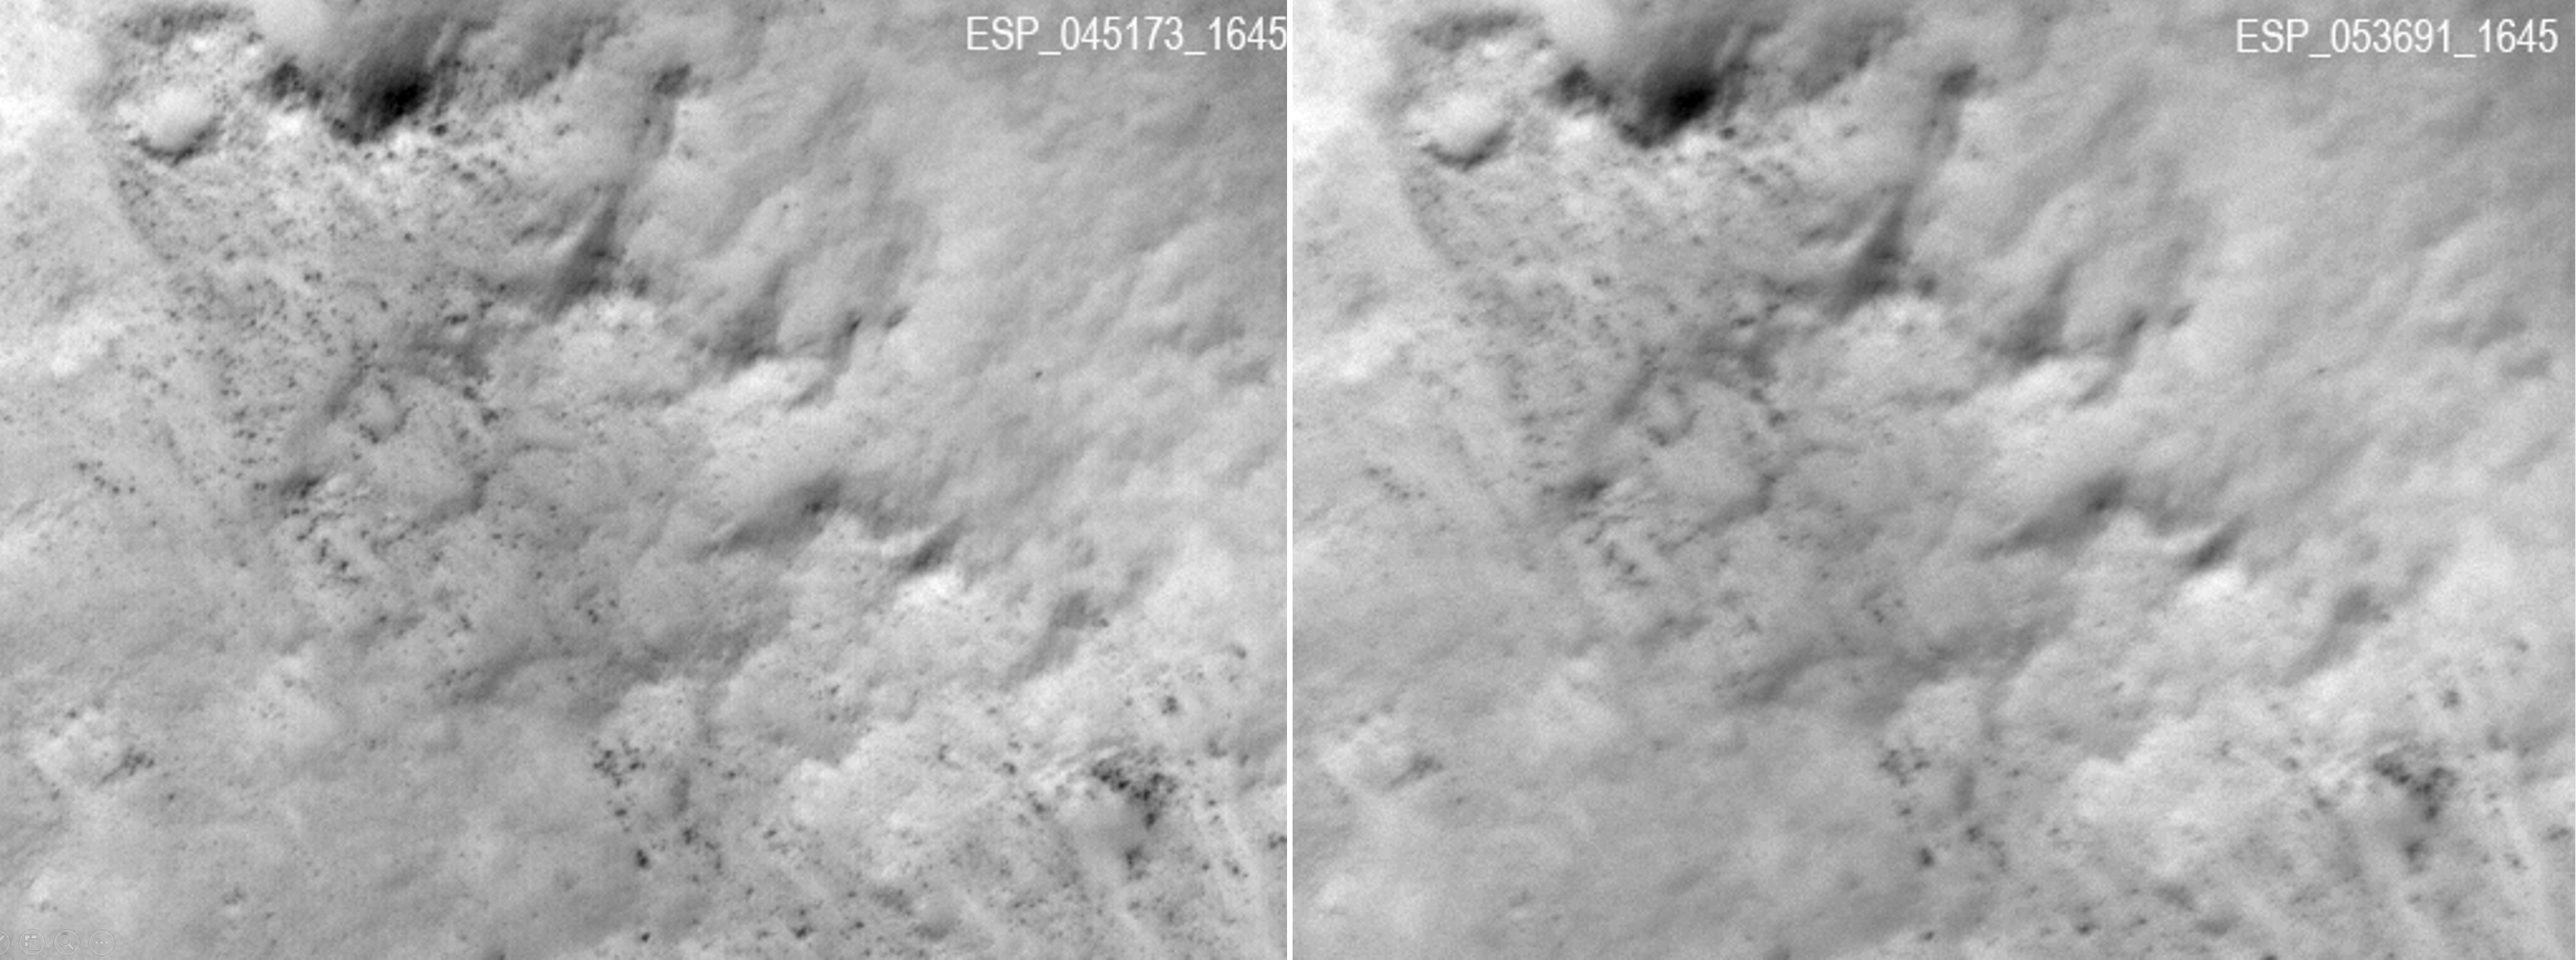 two side-by-side images of martian landscape from above, one blurry